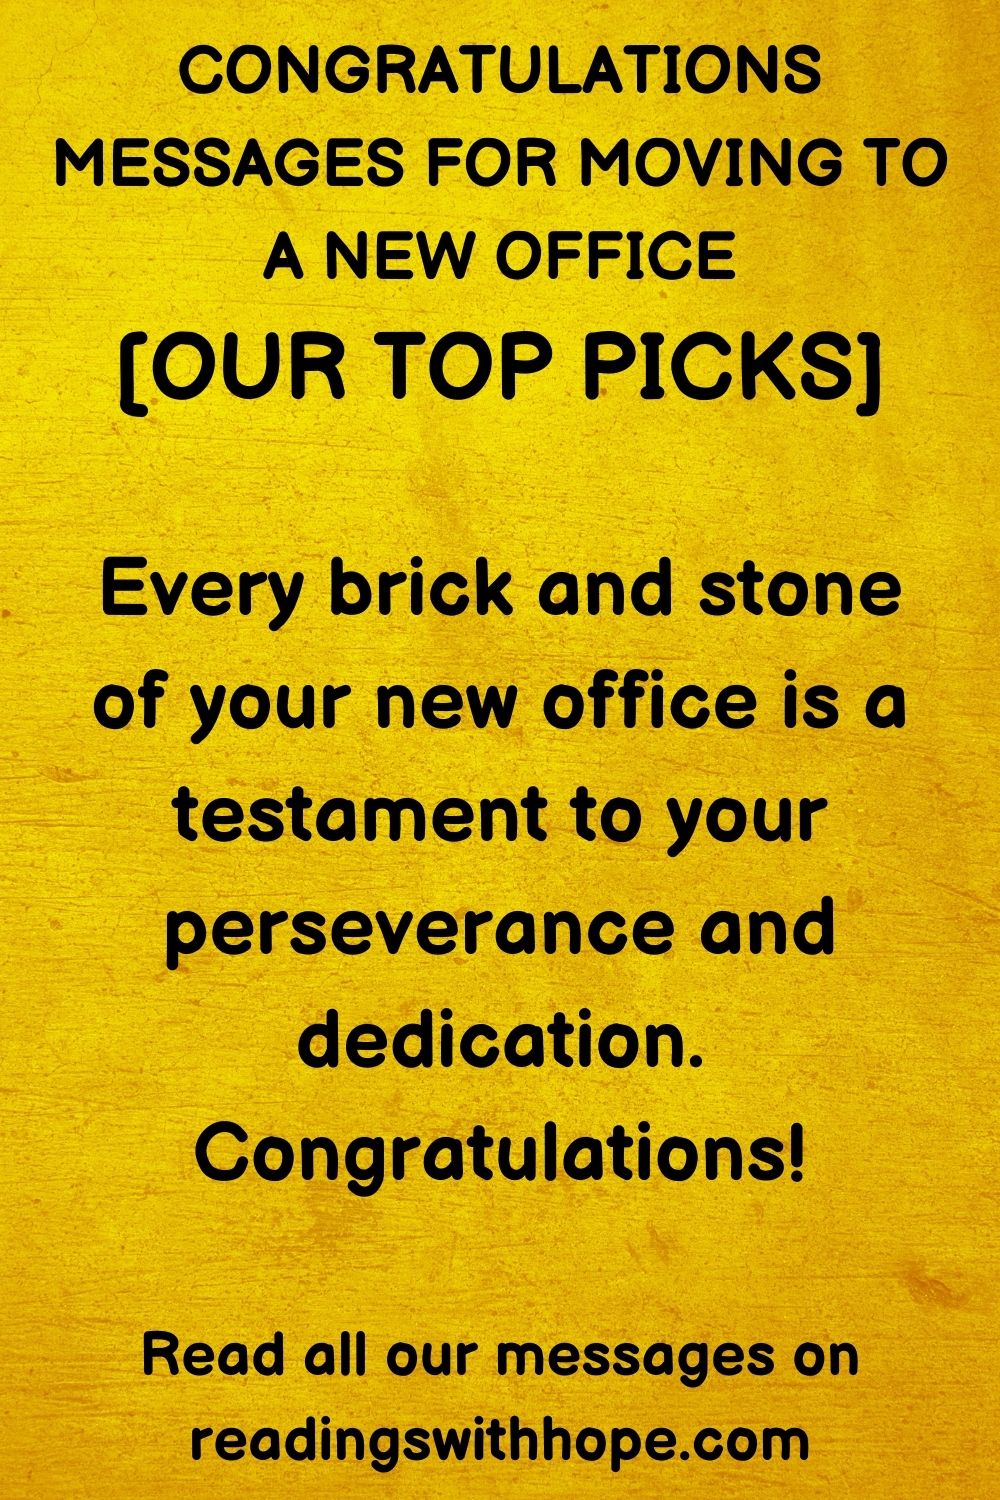 congratulations messages for moving to a new office that says Every brick and stone of your new office is a testament to your perseverance and dedication. Congratulations!